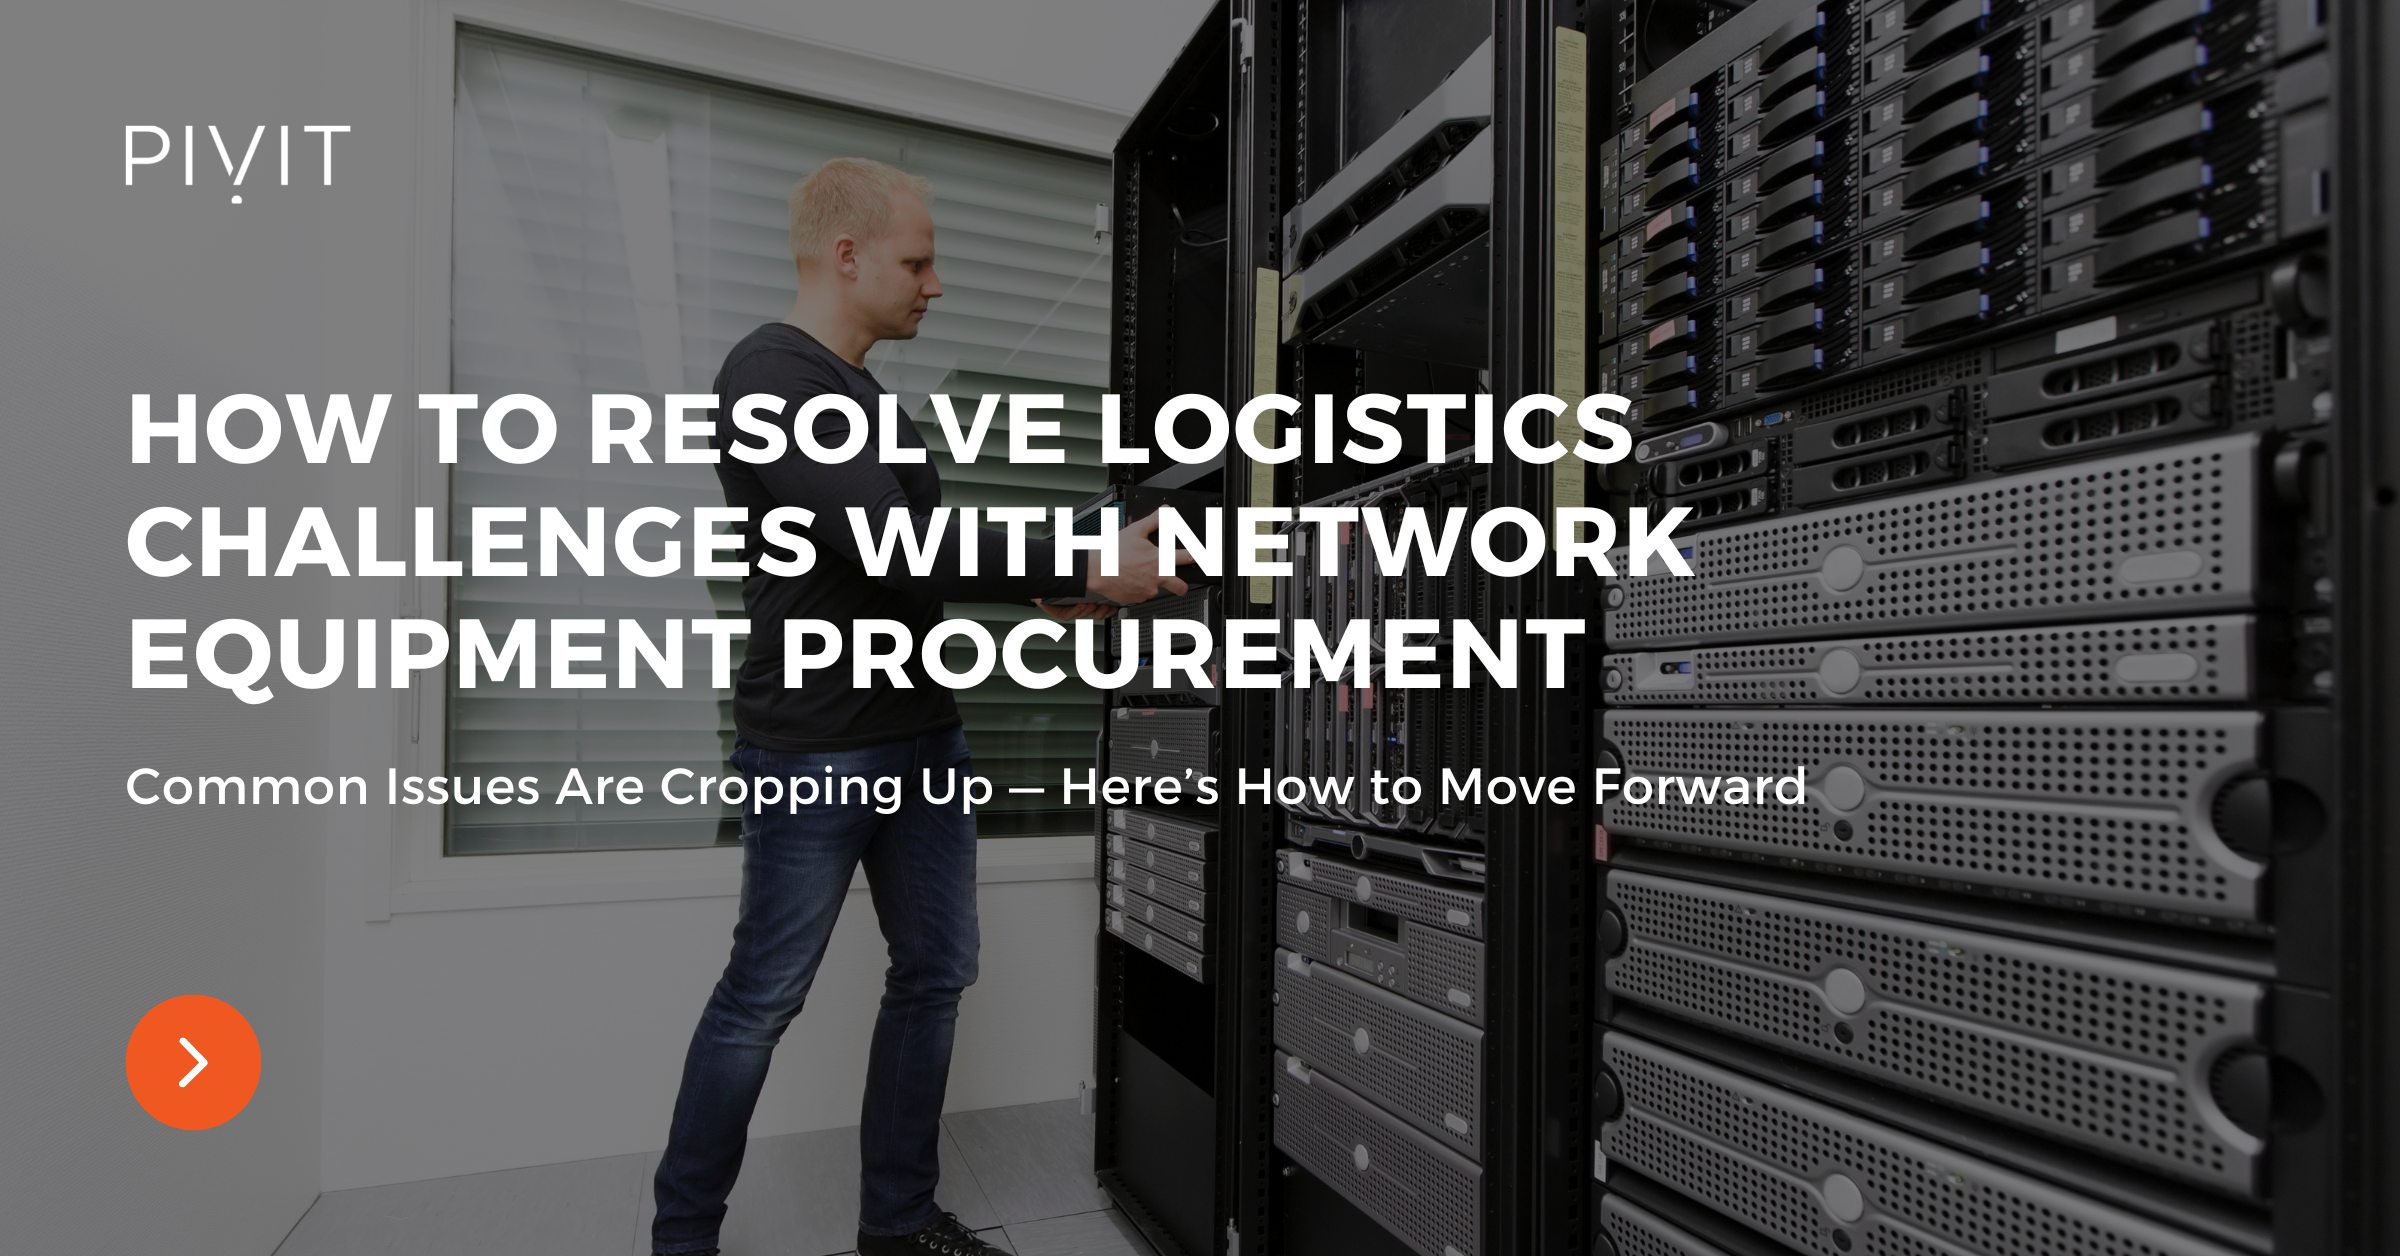 How to Resolve Logistics Challenges With Network Equipment Procurement